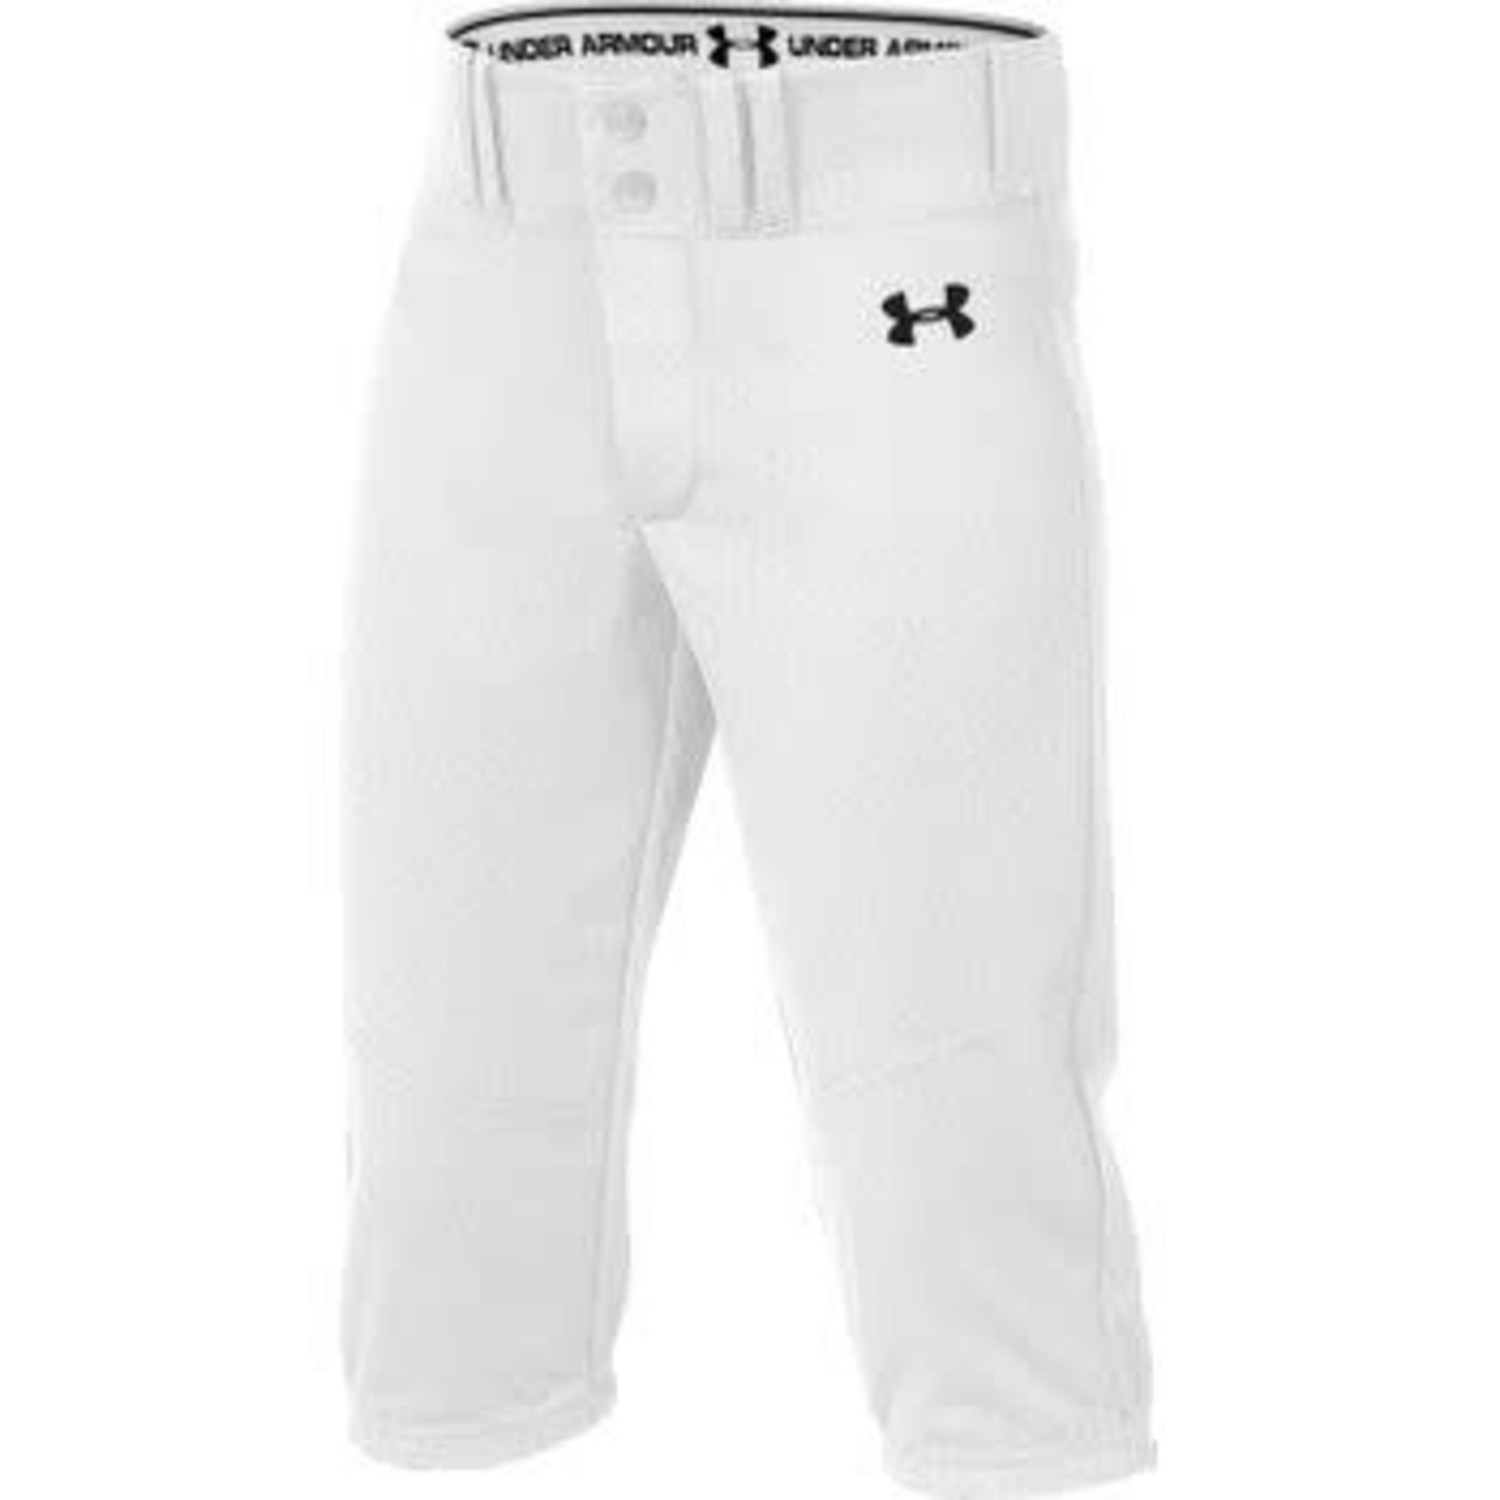 under armour baseball pants youth xl